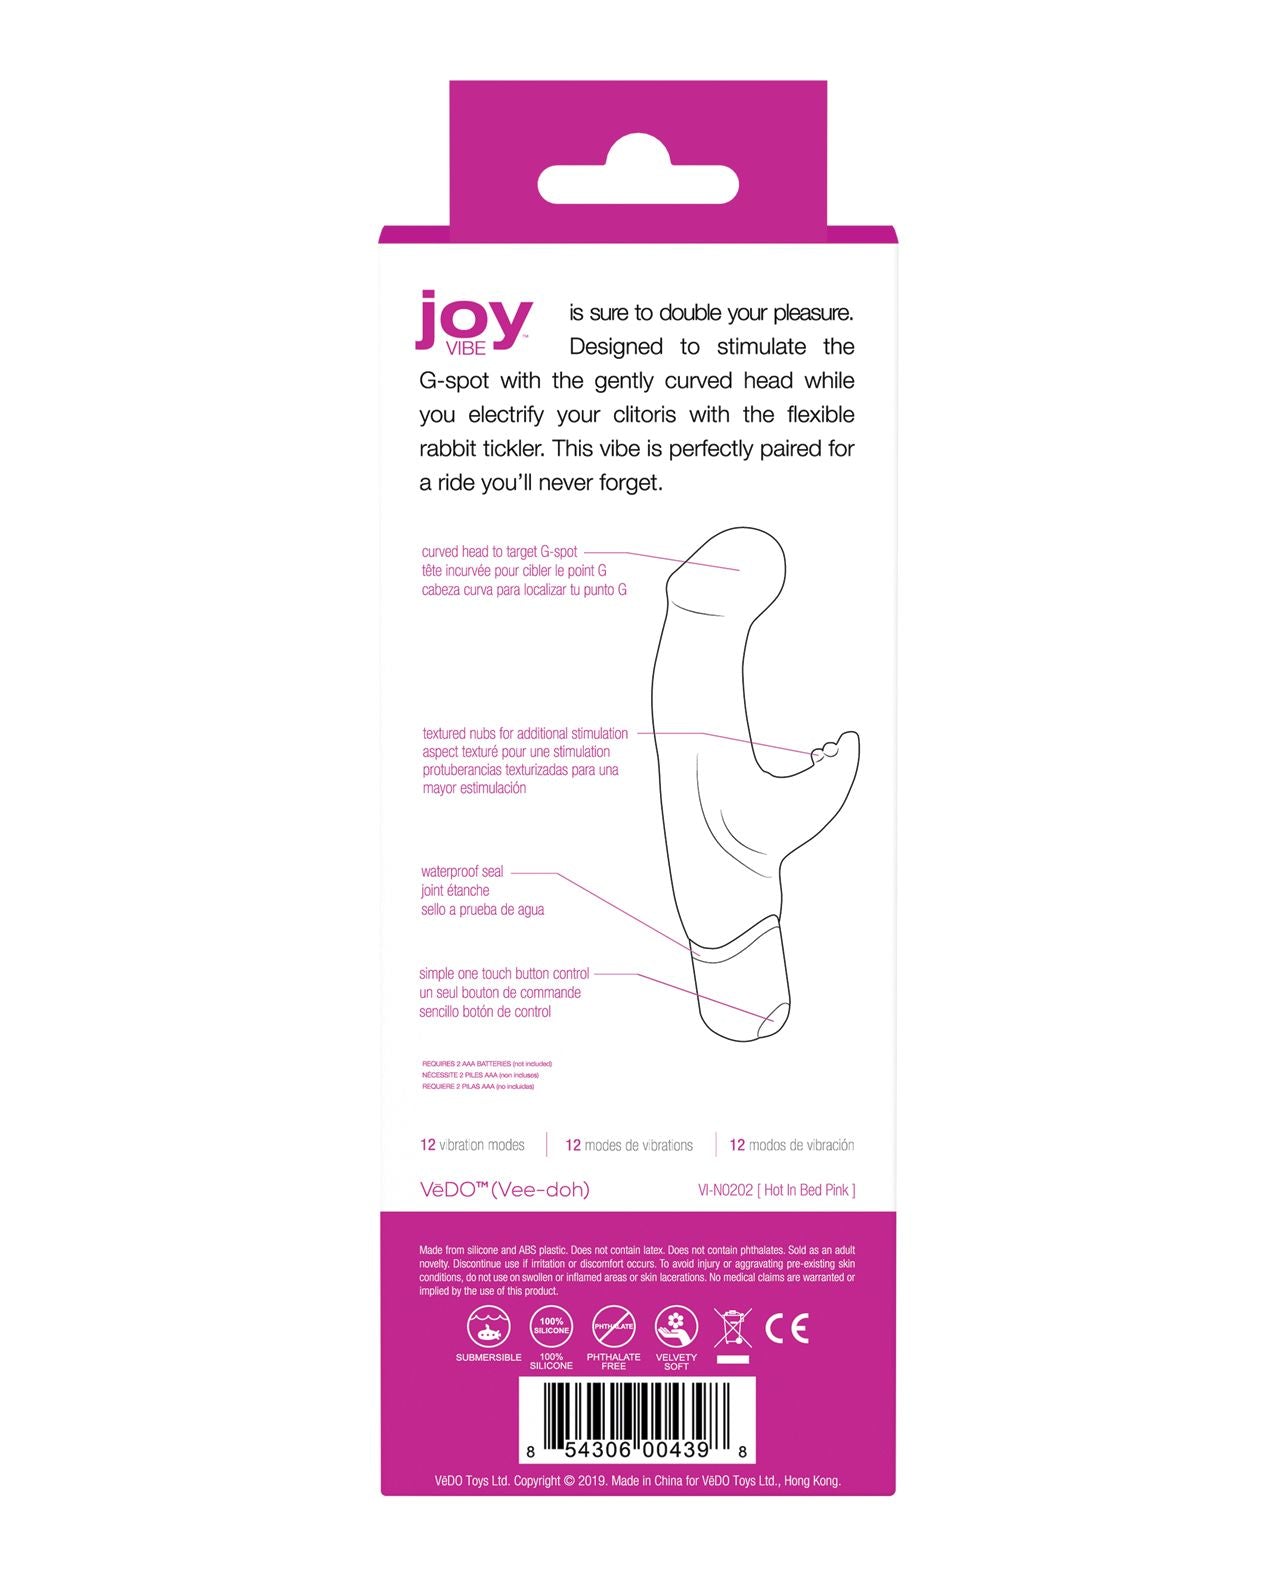 Back of the Joy vibe box showing illustrations of some of its features (hot pink).